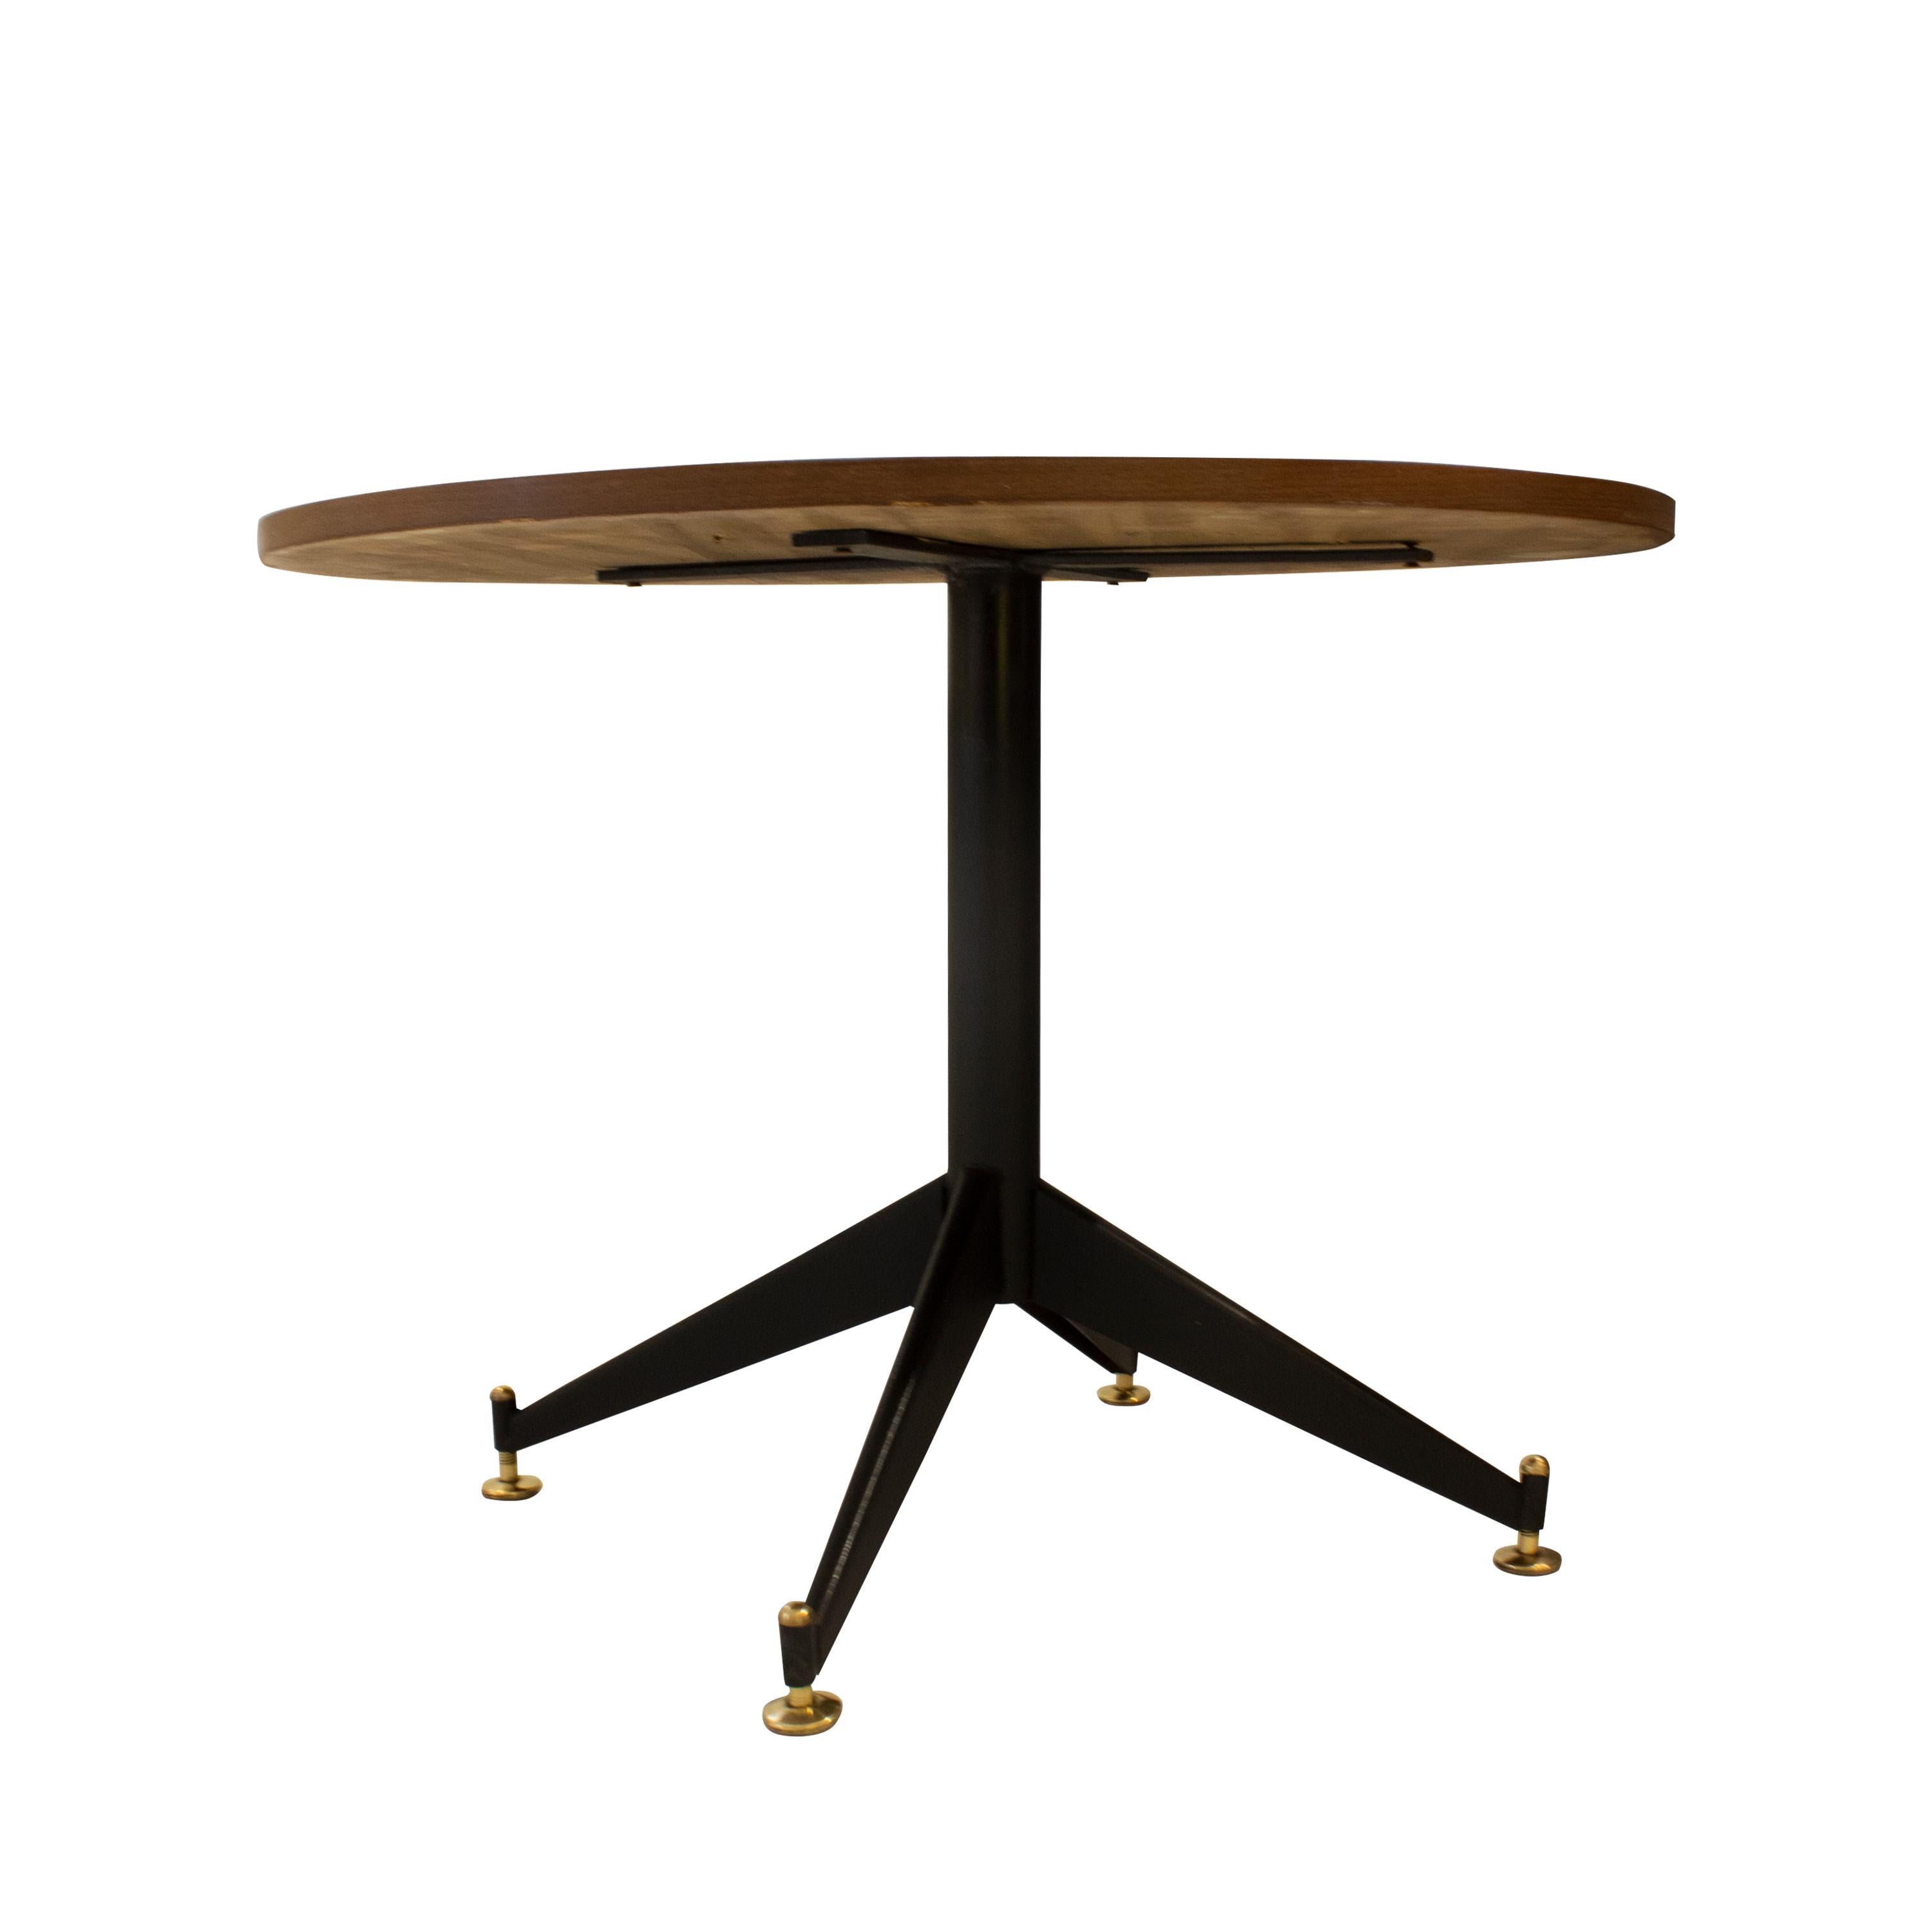 Italian rounded center table with black lacquered metal structure, birch top, and adjustable bronze pads.